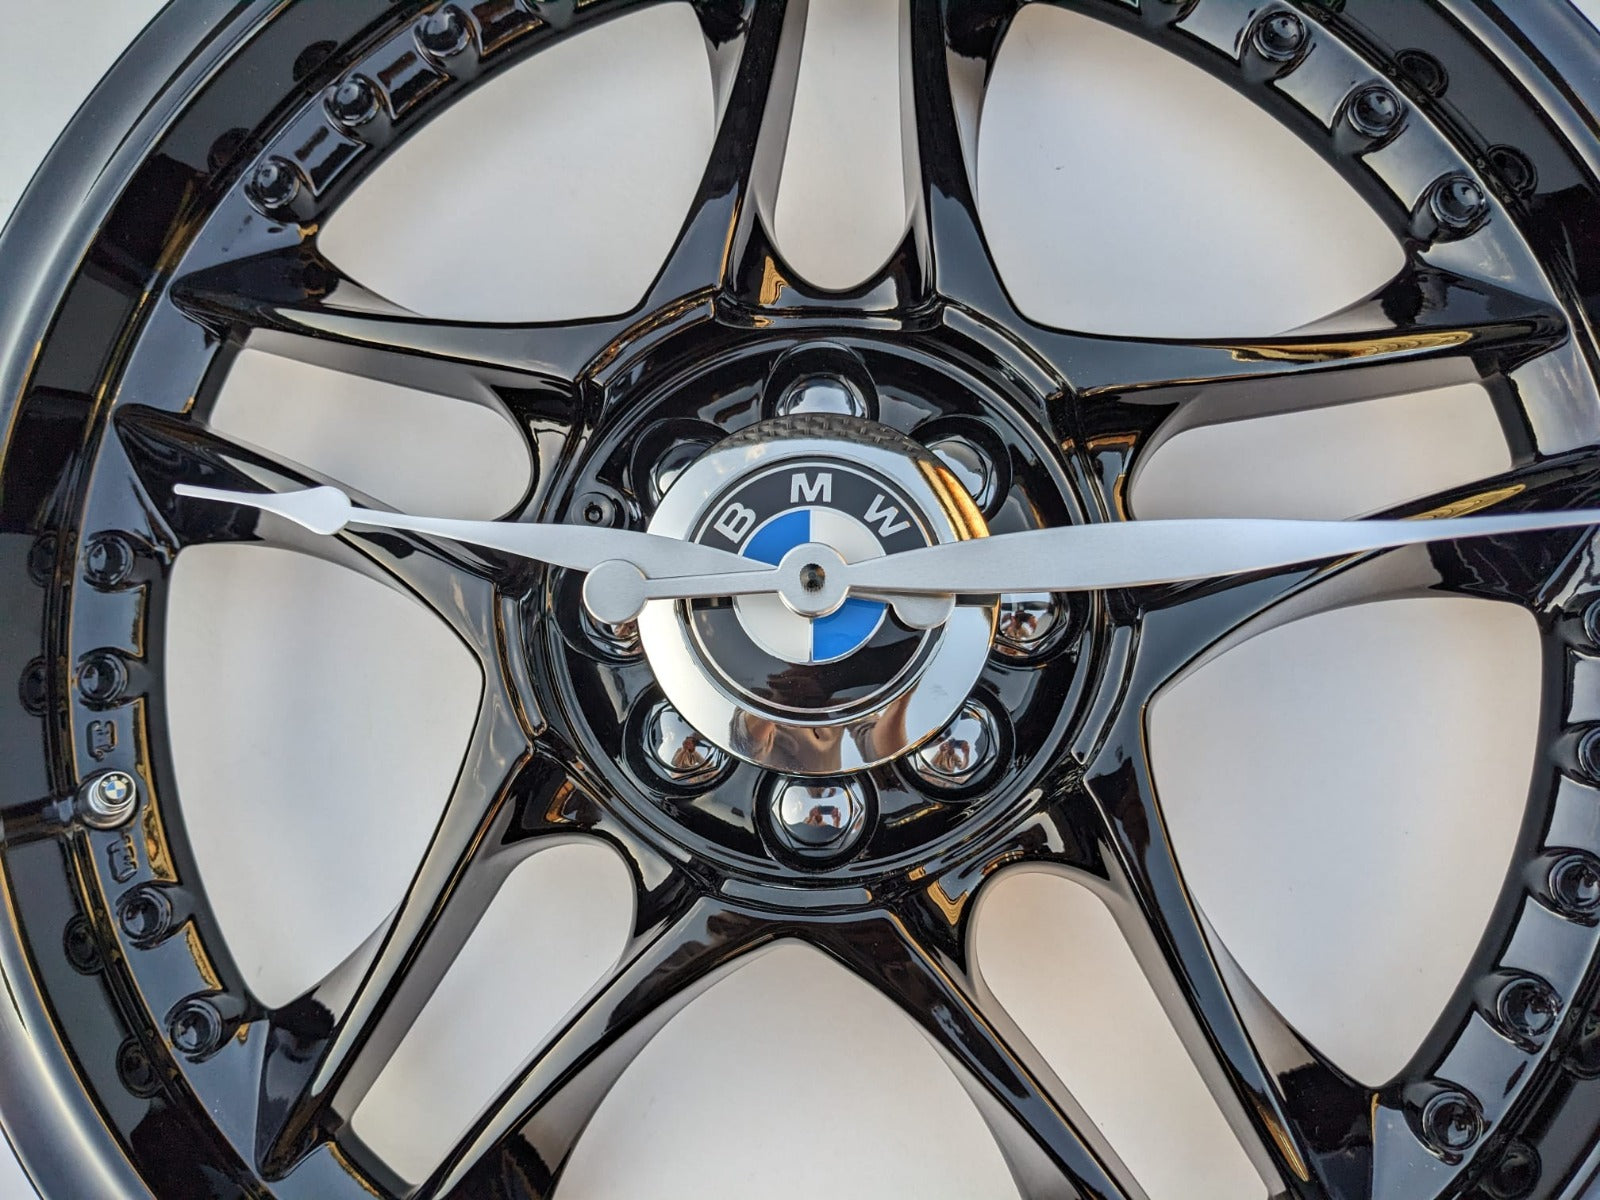 Alloy Wheel upcycled to stunning BMW Wheel wall clock